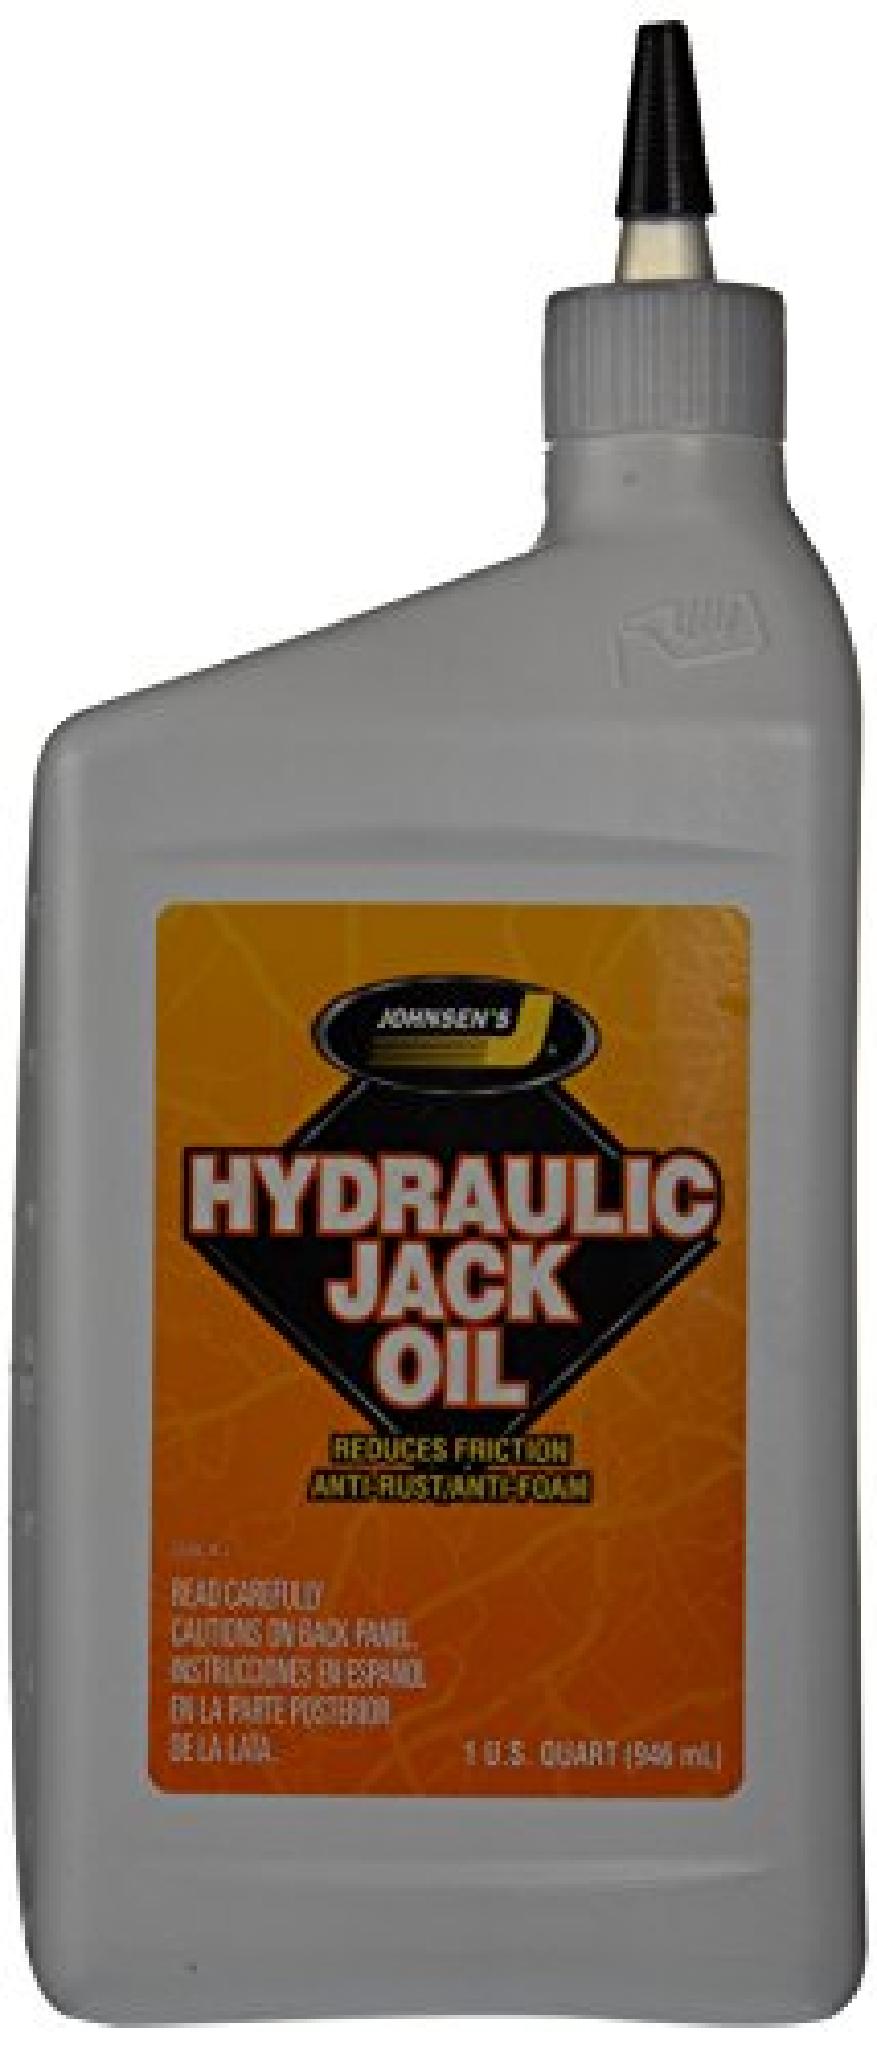 HYDRAULIC JACK OIL - 039101055947 – KJS Holdings Inc Trading as